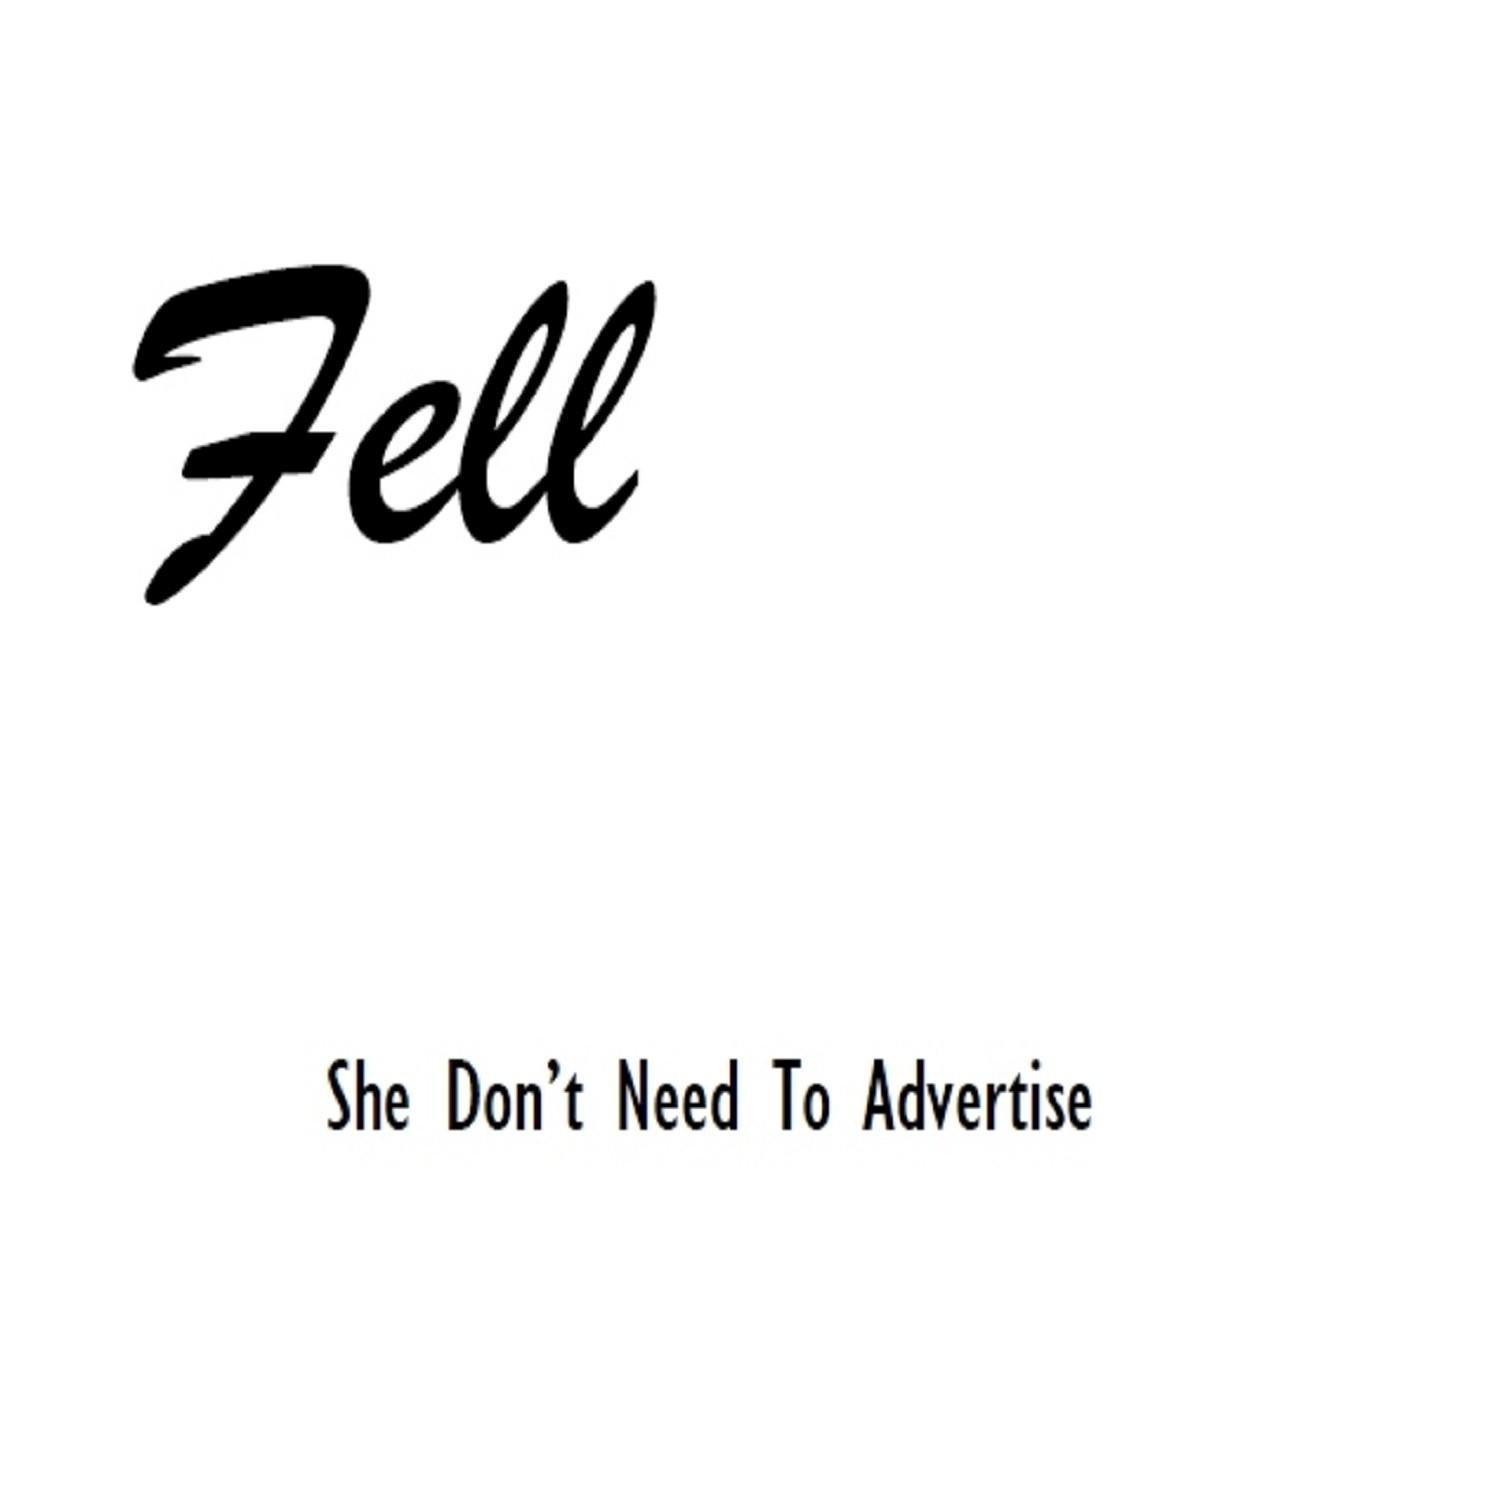 She Don't Need to Advertise - Single